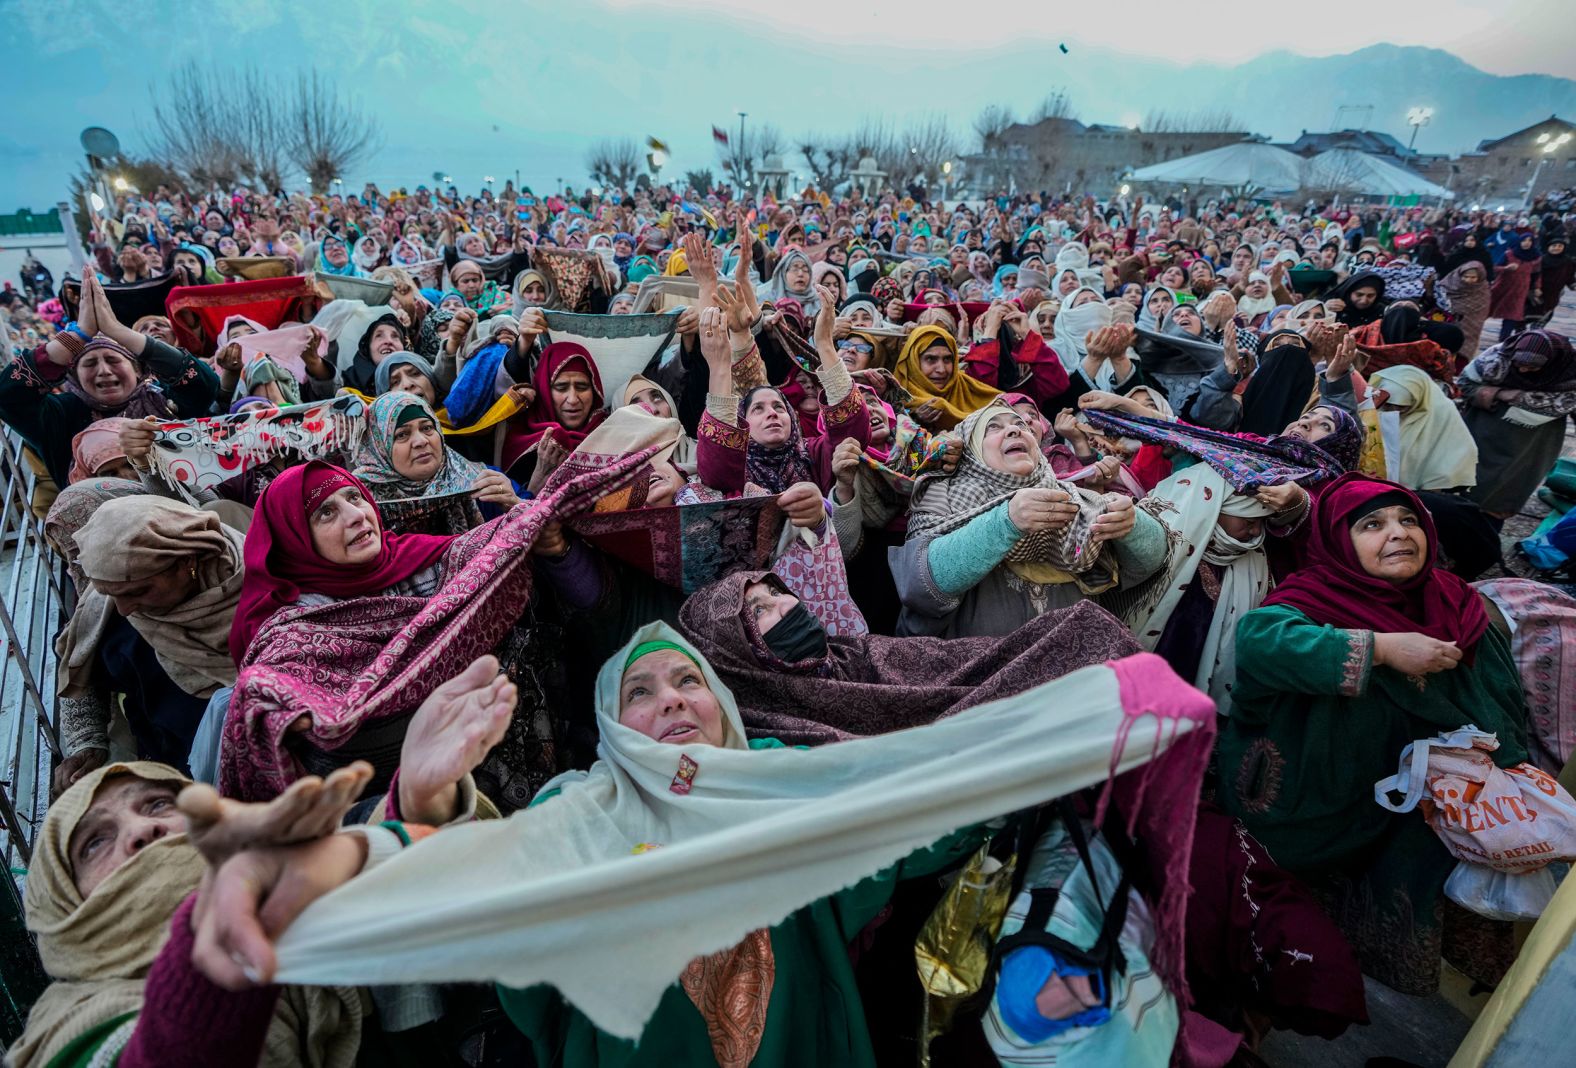 Kashmiri Muslims pray as the head priest displays a relic, believed to be a hair from the beard of the Prophet Mohammed, at the Hazratbal Shrine in Srinagar, India, on Thursday, February 8.